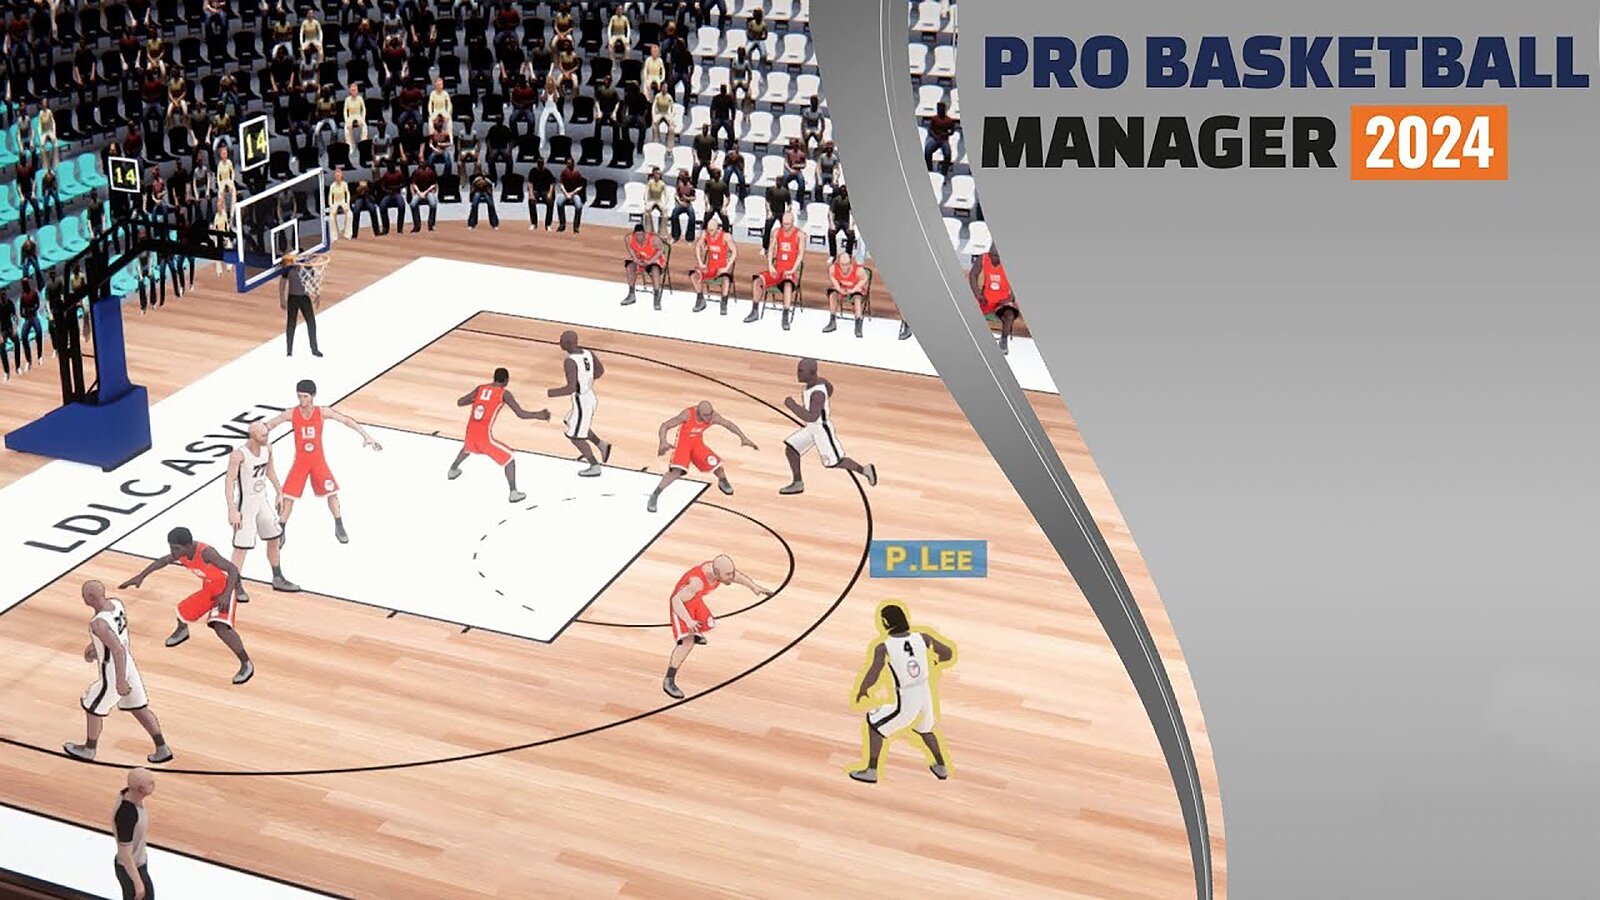 Pro Basketball Manager 2024